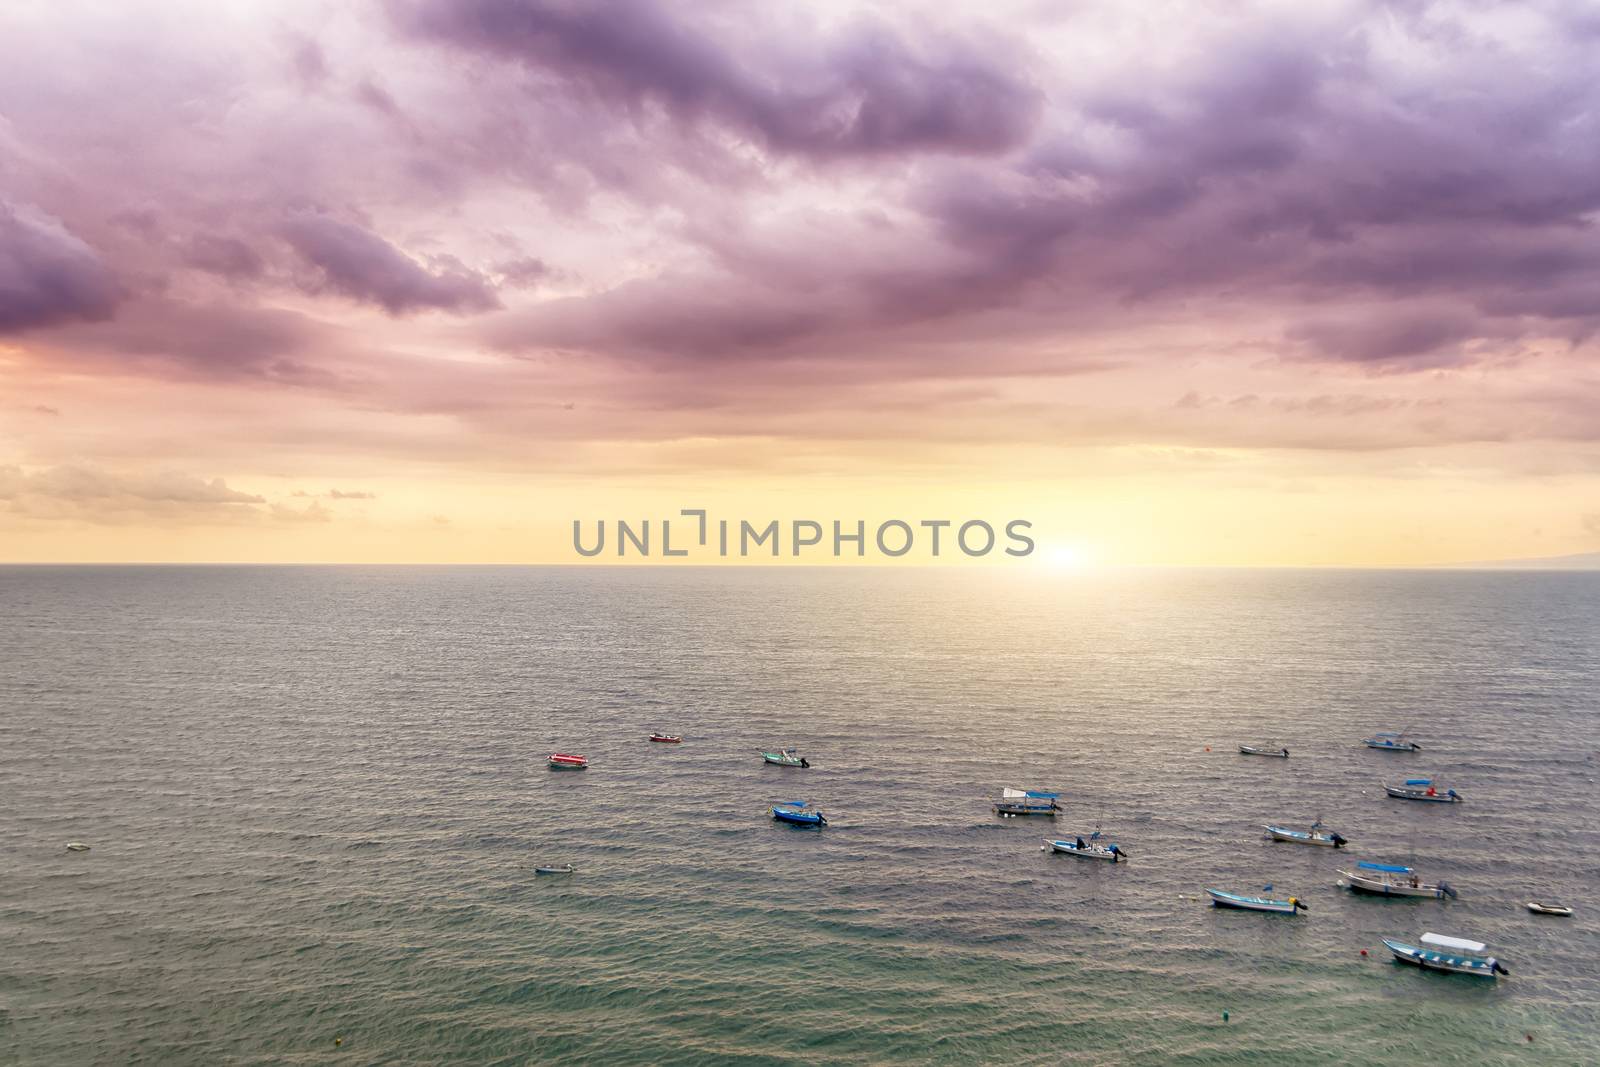 Puerto Vallarta, a resort town in Mexico, is famous by it's sunsets. This picture was taken above Los Muertos beach, close to the pier called Mirador.